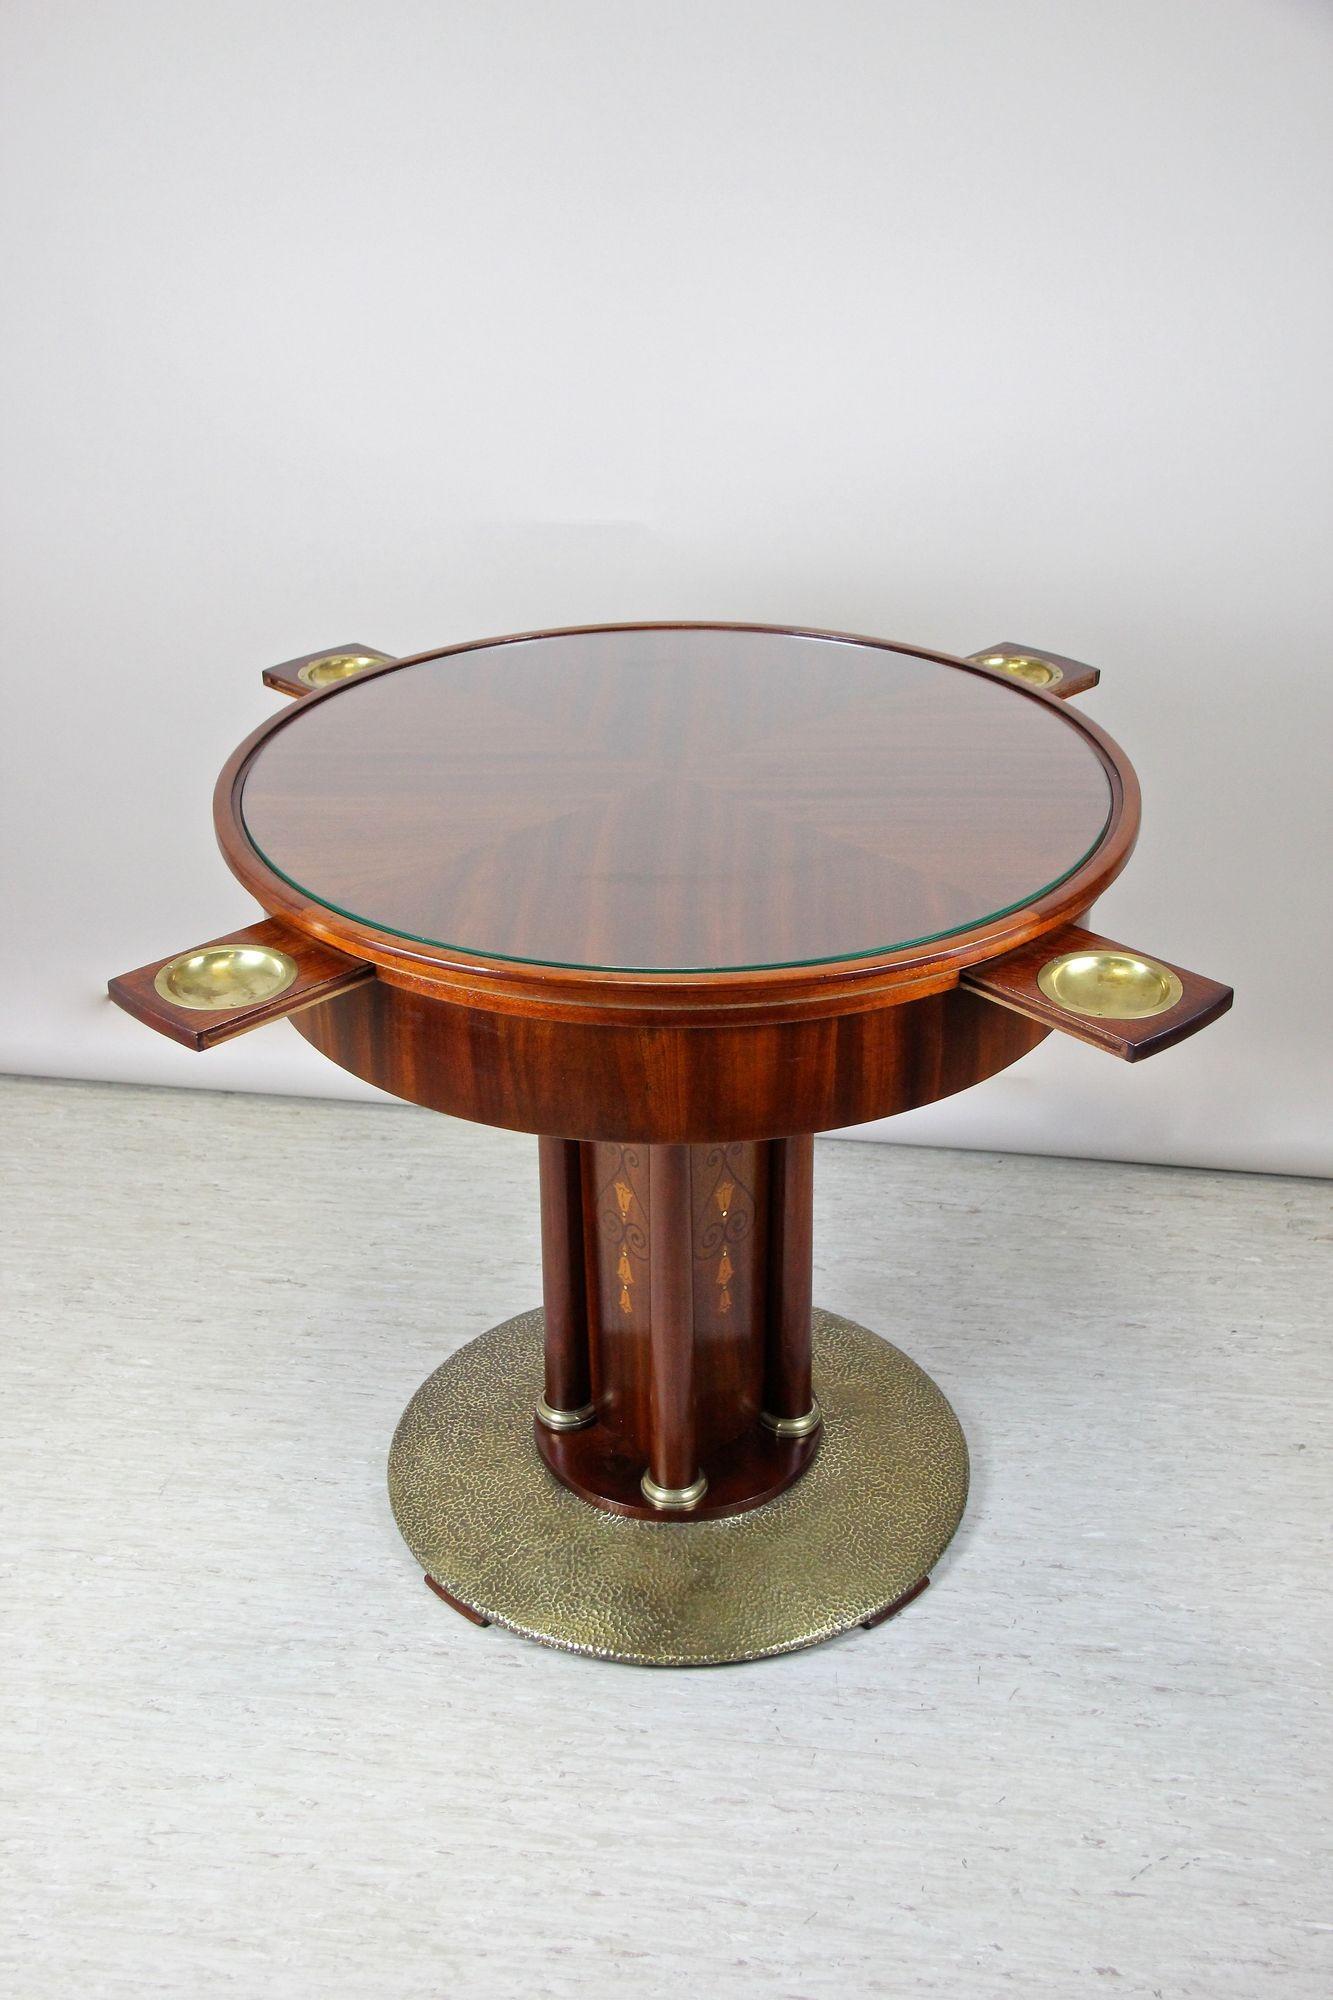 Remarkable Art Nouveau mahogany gaming table out of Vienna/ Austria from the early 20th century circa 1910. The round tabletop, covered by a protecting glass plate, sits on a square column adorned by elaborately fruitwood inlay works on all four